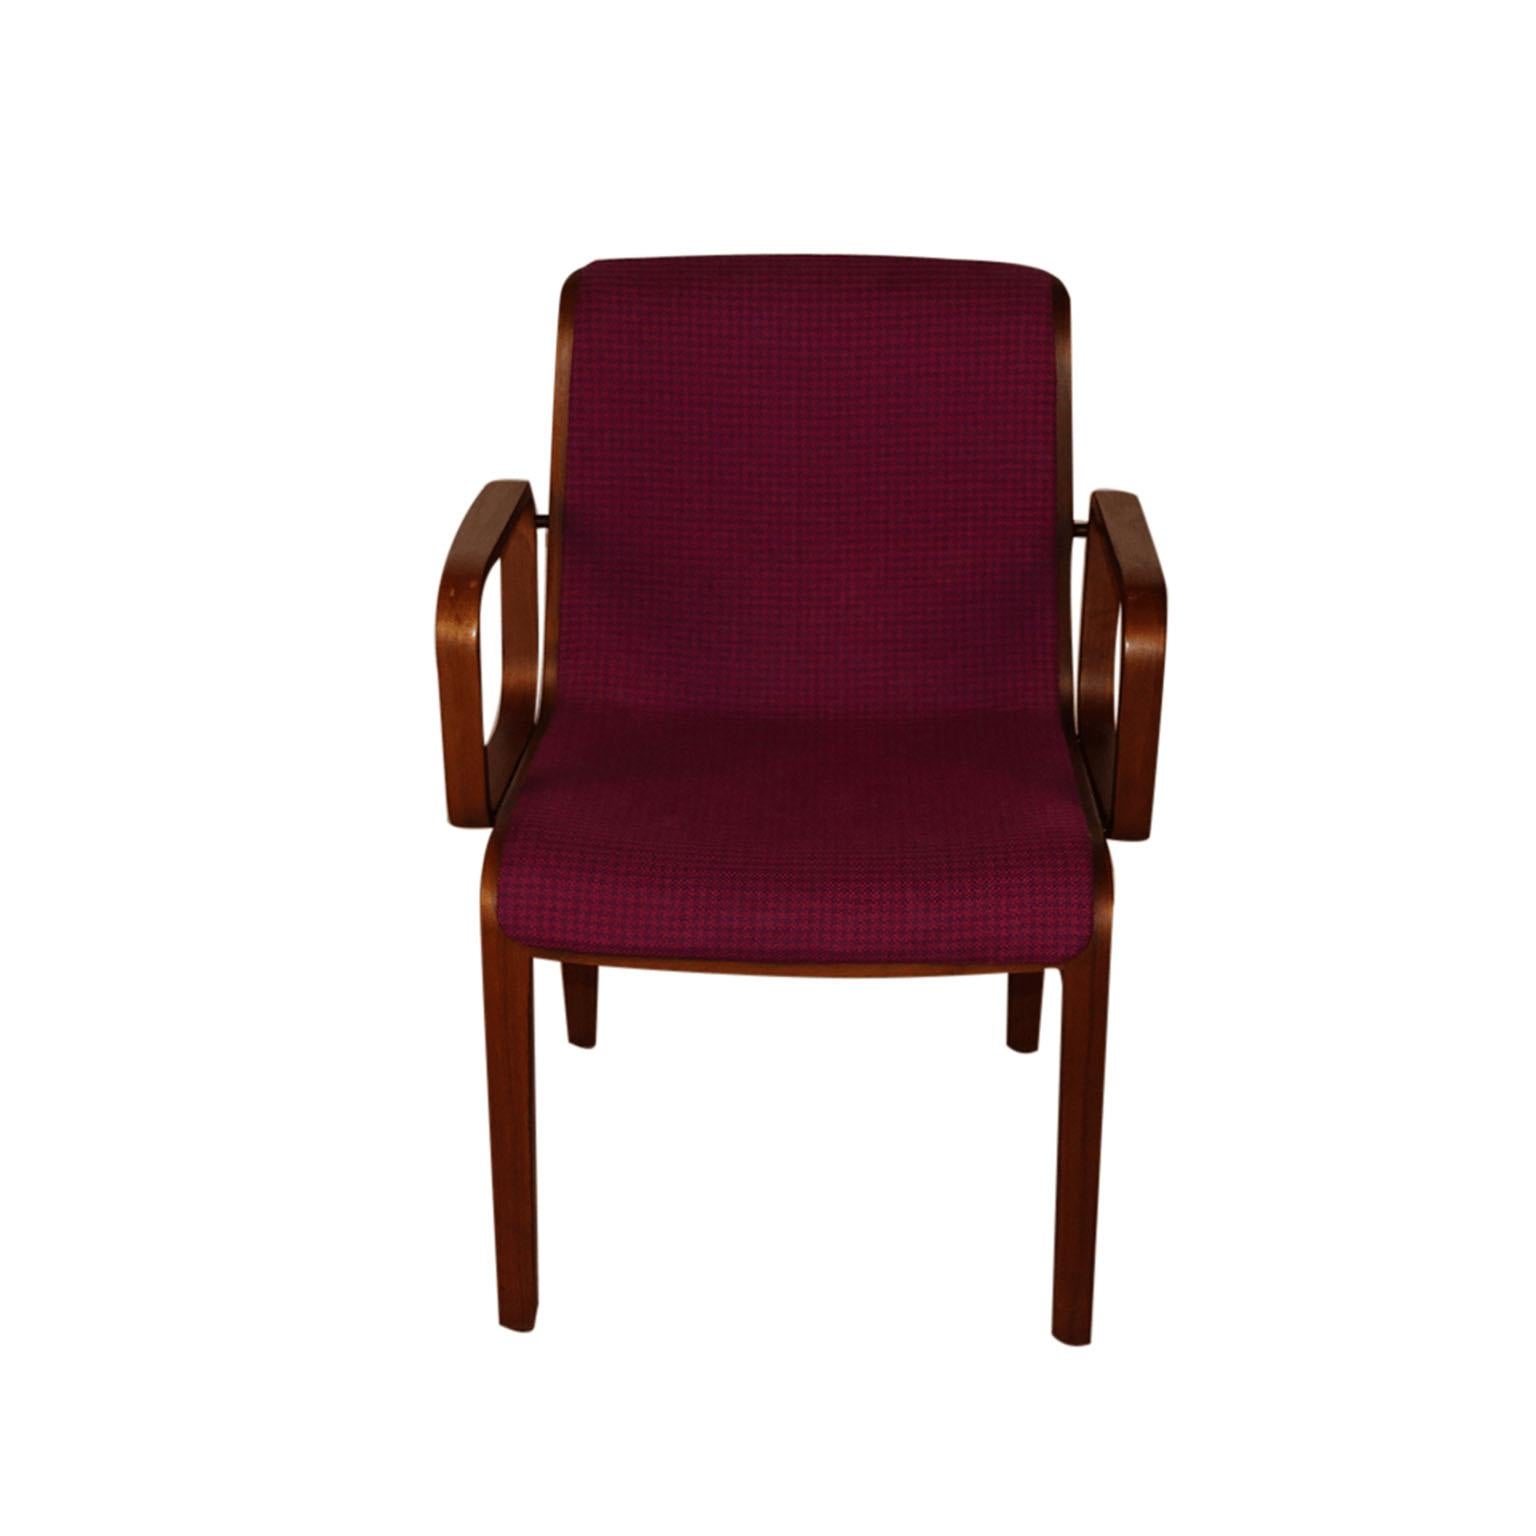 Extraordinary Mid-Century Modern dining/accent chair Model 1305UO, designed by William “Bill” Stephens for Knoll International, 1970s. Manufactured 1972-1988. Featuring original, striking purple herringbone upholstery on the front and back that